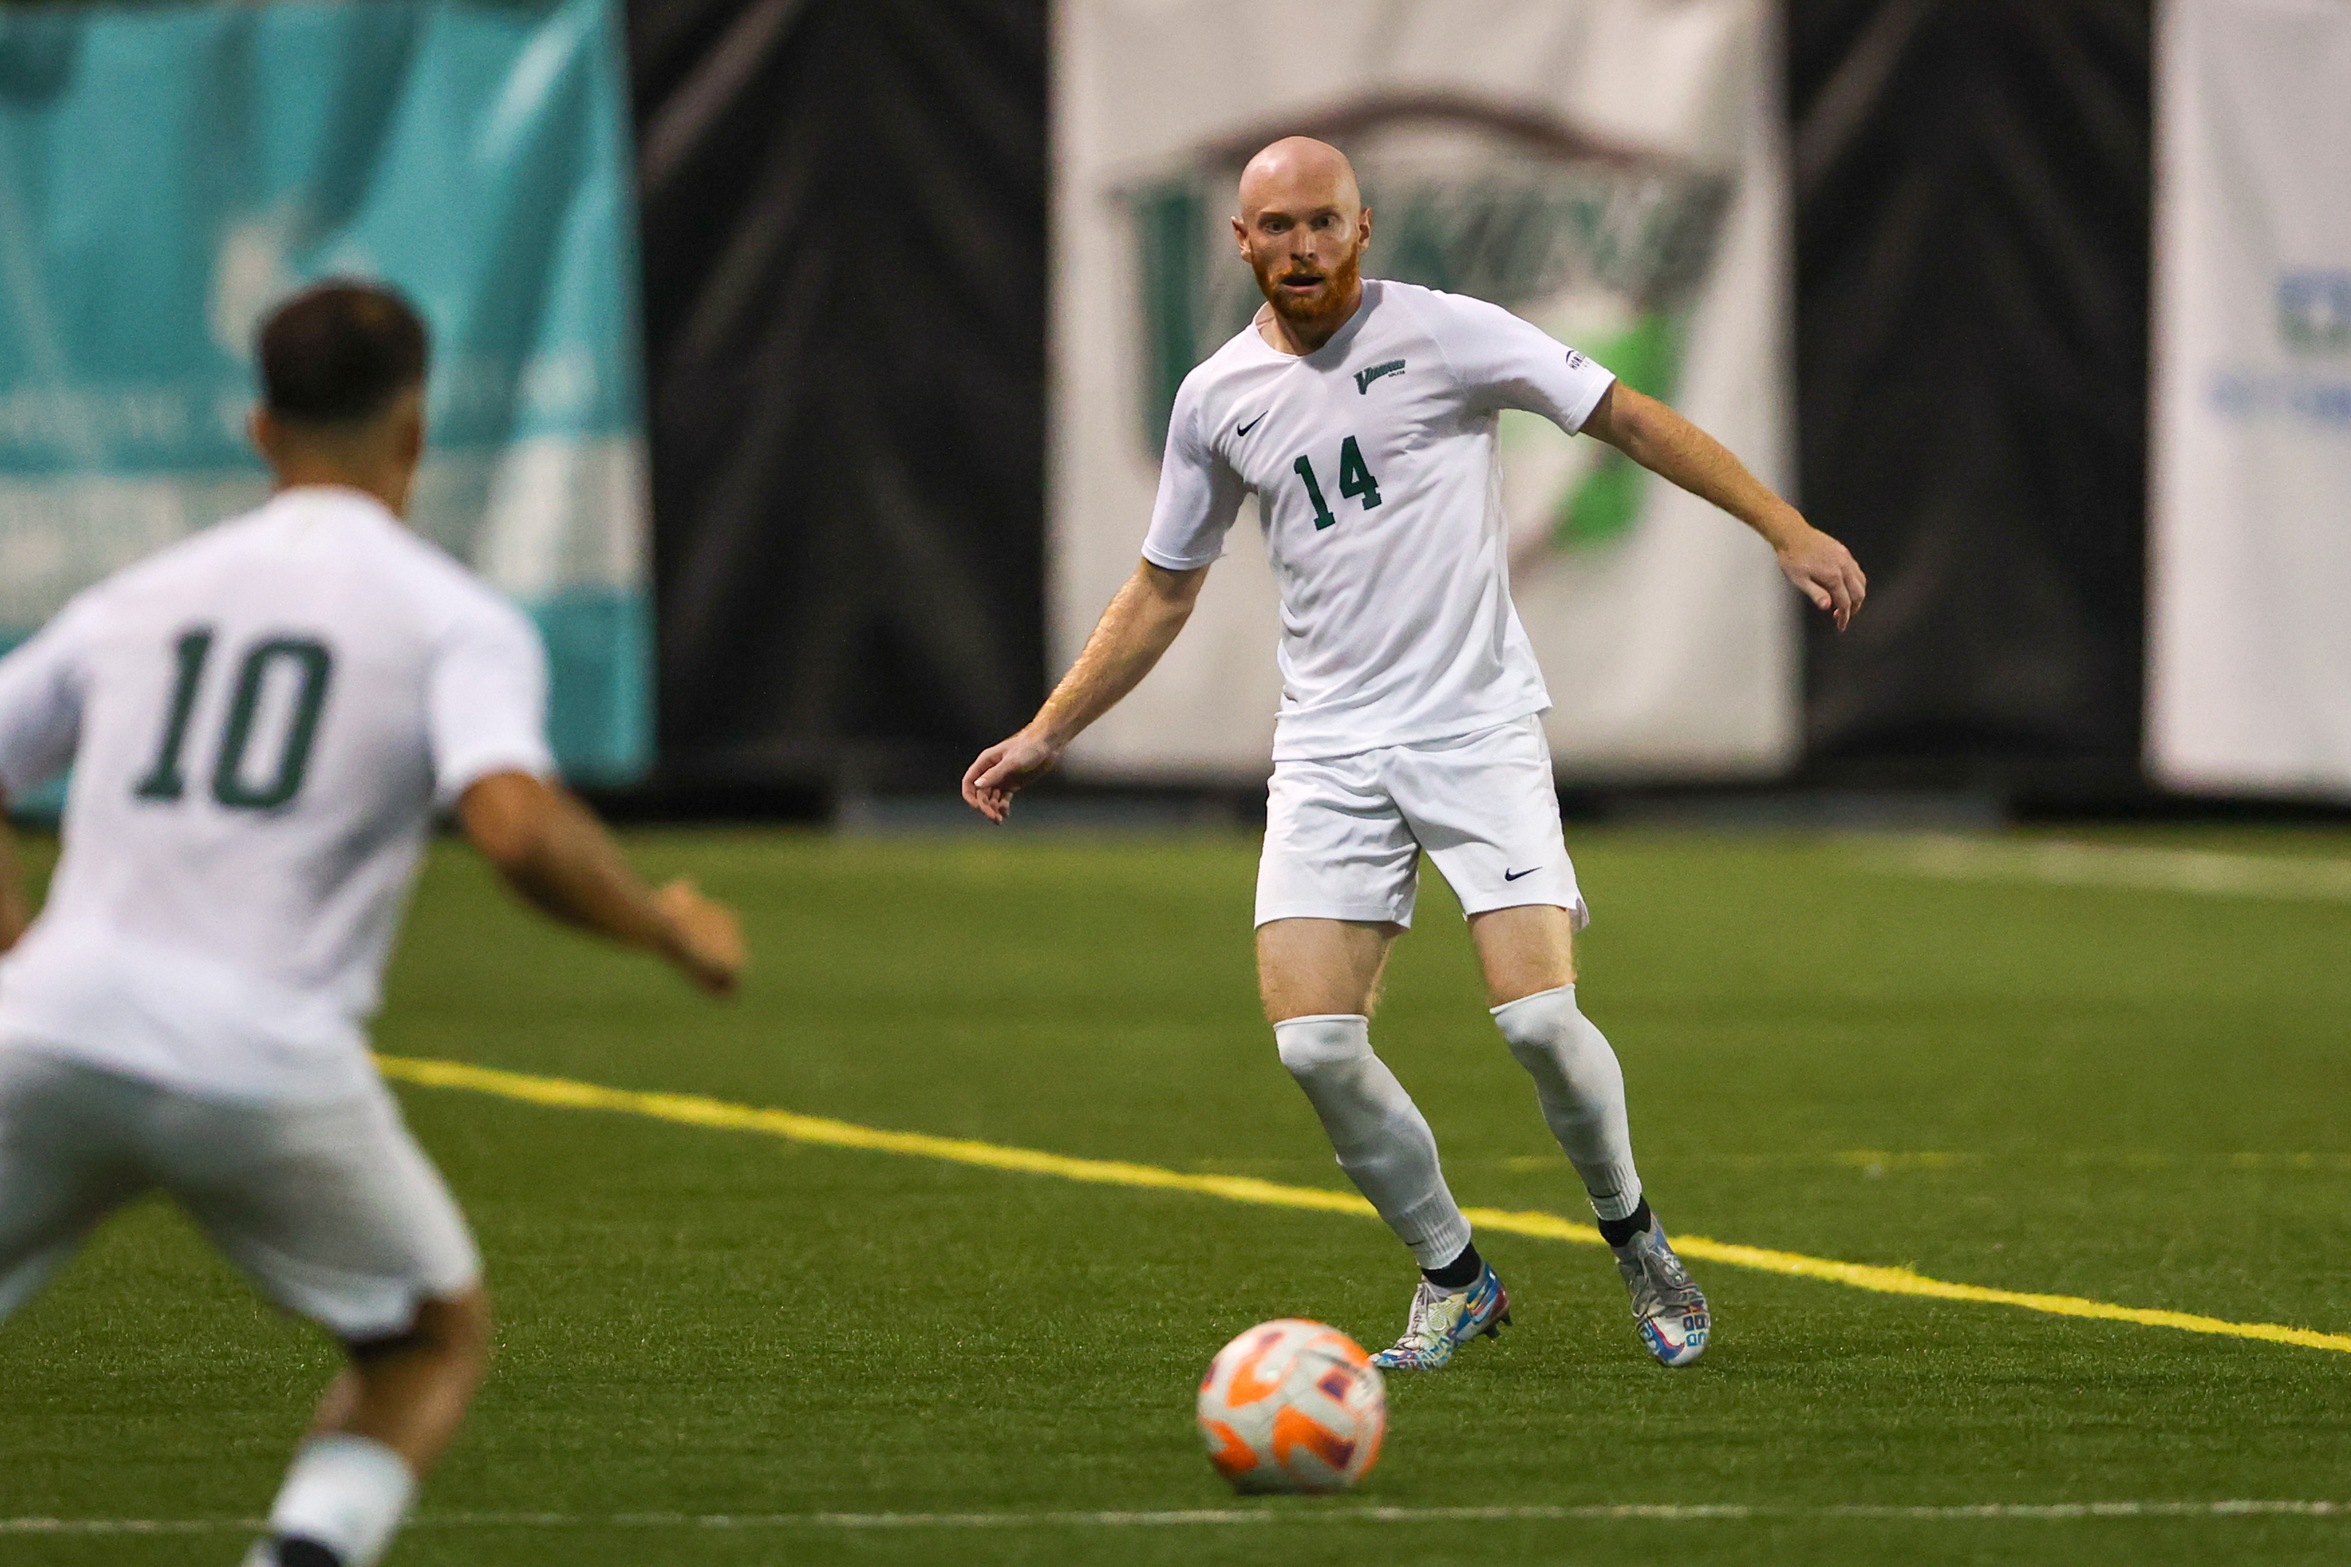 Cleveland State Men's Soccer Hosts Wright State for Senior Night